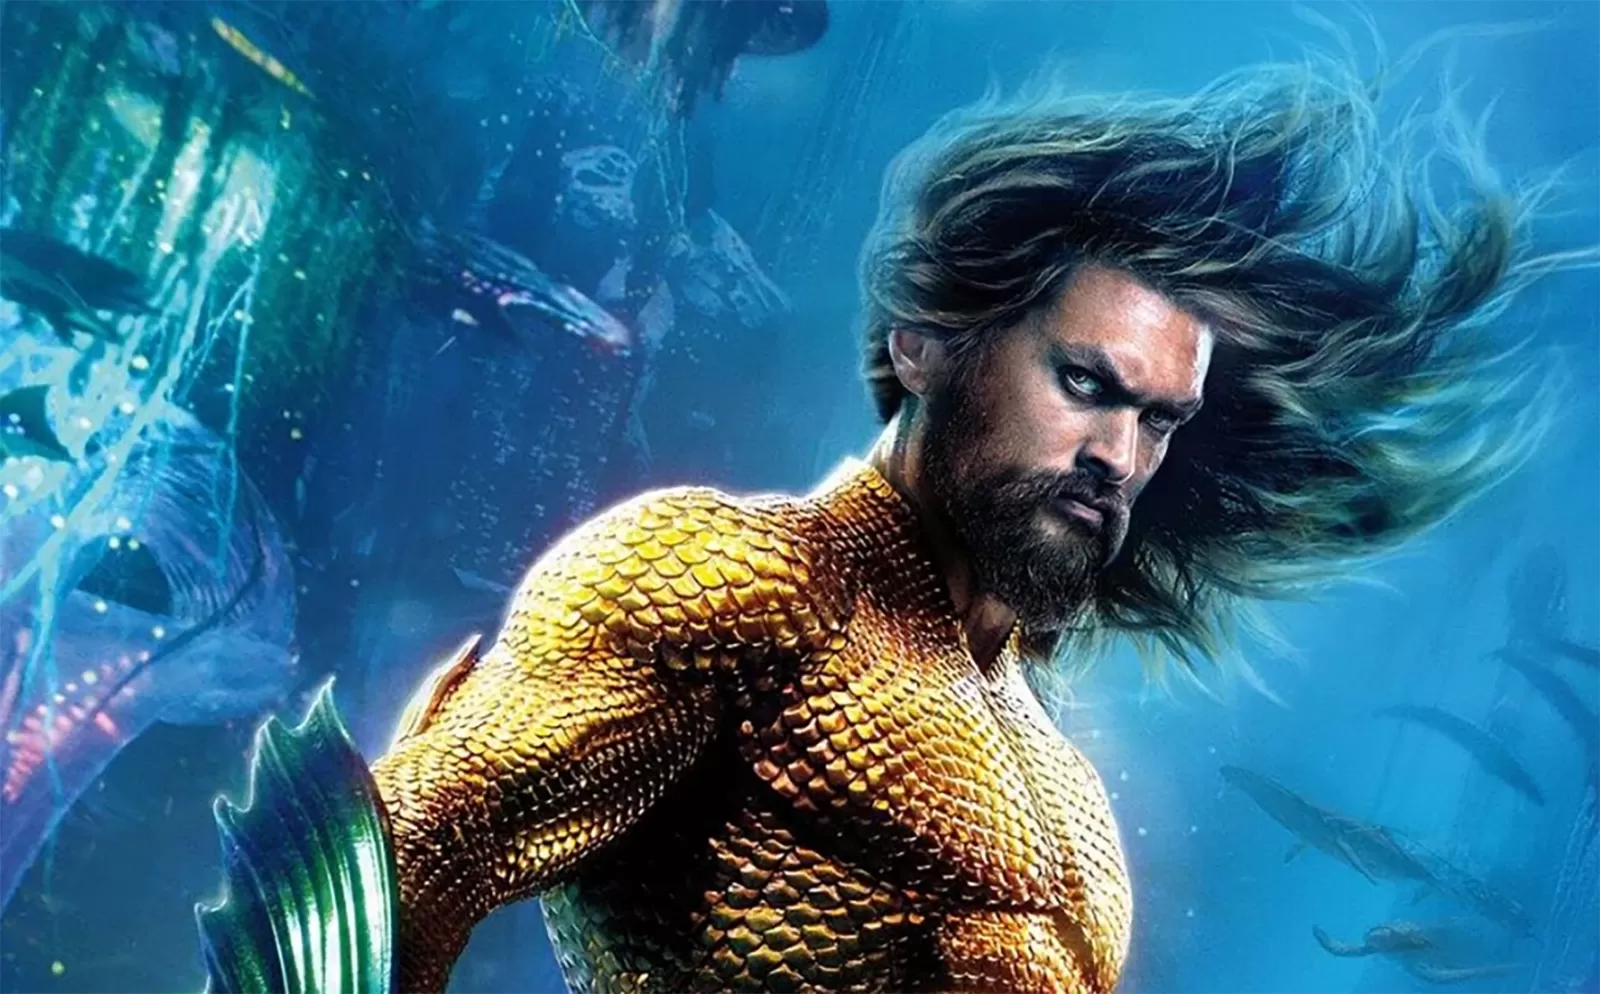 Watch Aquaman and the Lost Kingdom Full Movie Free Version 1080P Full HD, Aquaman and the Lost Kingdom 1080p free online, Aquaman and the Lost Kingdom full HD free online, Watch Aquaman and the Lost Kingdom full HD 1080p free online, See Aquaman and the Lost Kingdom full HD 1080p free online, Aquaman and the Lost Kingdom 1080p, Aquaman and the Lost Kingdom 720p, Watch online Aquaman and the Lost Kingdom full free, Aquaman and the Lost Kingdom full movie free online, Aquaman and the Lost Kingdom 2023, See movie Aquaman and the Lost Kingdom online free full, Aquaman and the Lost Kingdom, Aquaman and the Lost Kingdom online, See film Aquaman and the Lost Kingdom online, See movie free online Aquaman and the Lost Kingdom, Aquaman and the Lost Kingdom download, Download movie Aquaman and the Lost Kingdom, Action Movies, Action & Adventure Movies